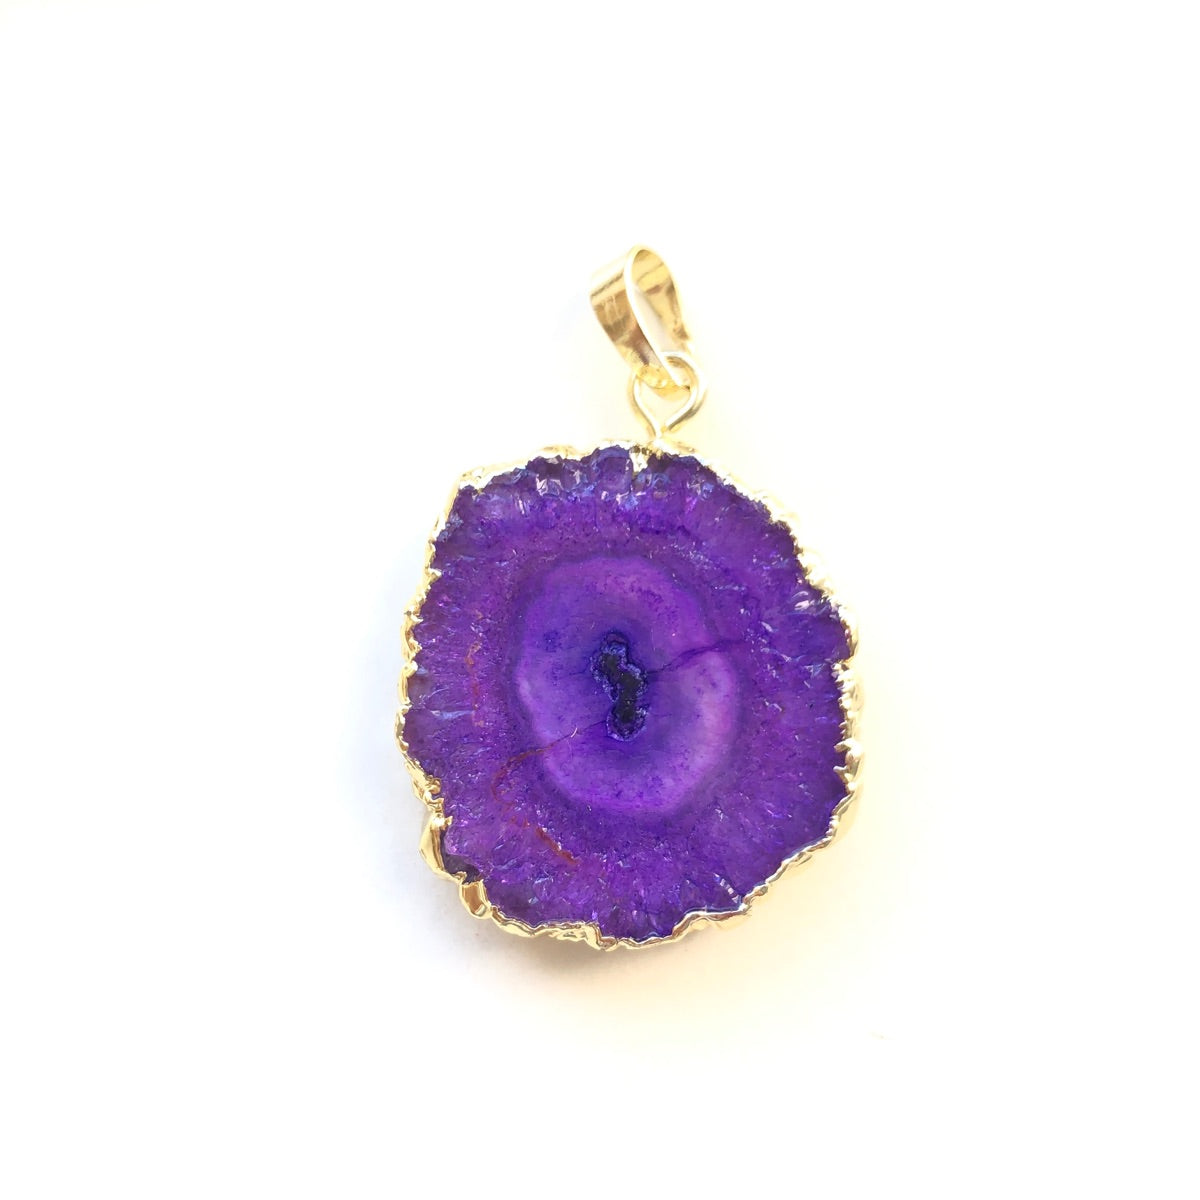 1PC 30mm Gold Plated Sun Flower Agate Charm-Premium Quality Purple on Gold Stone Charms Charms Beads Beyond